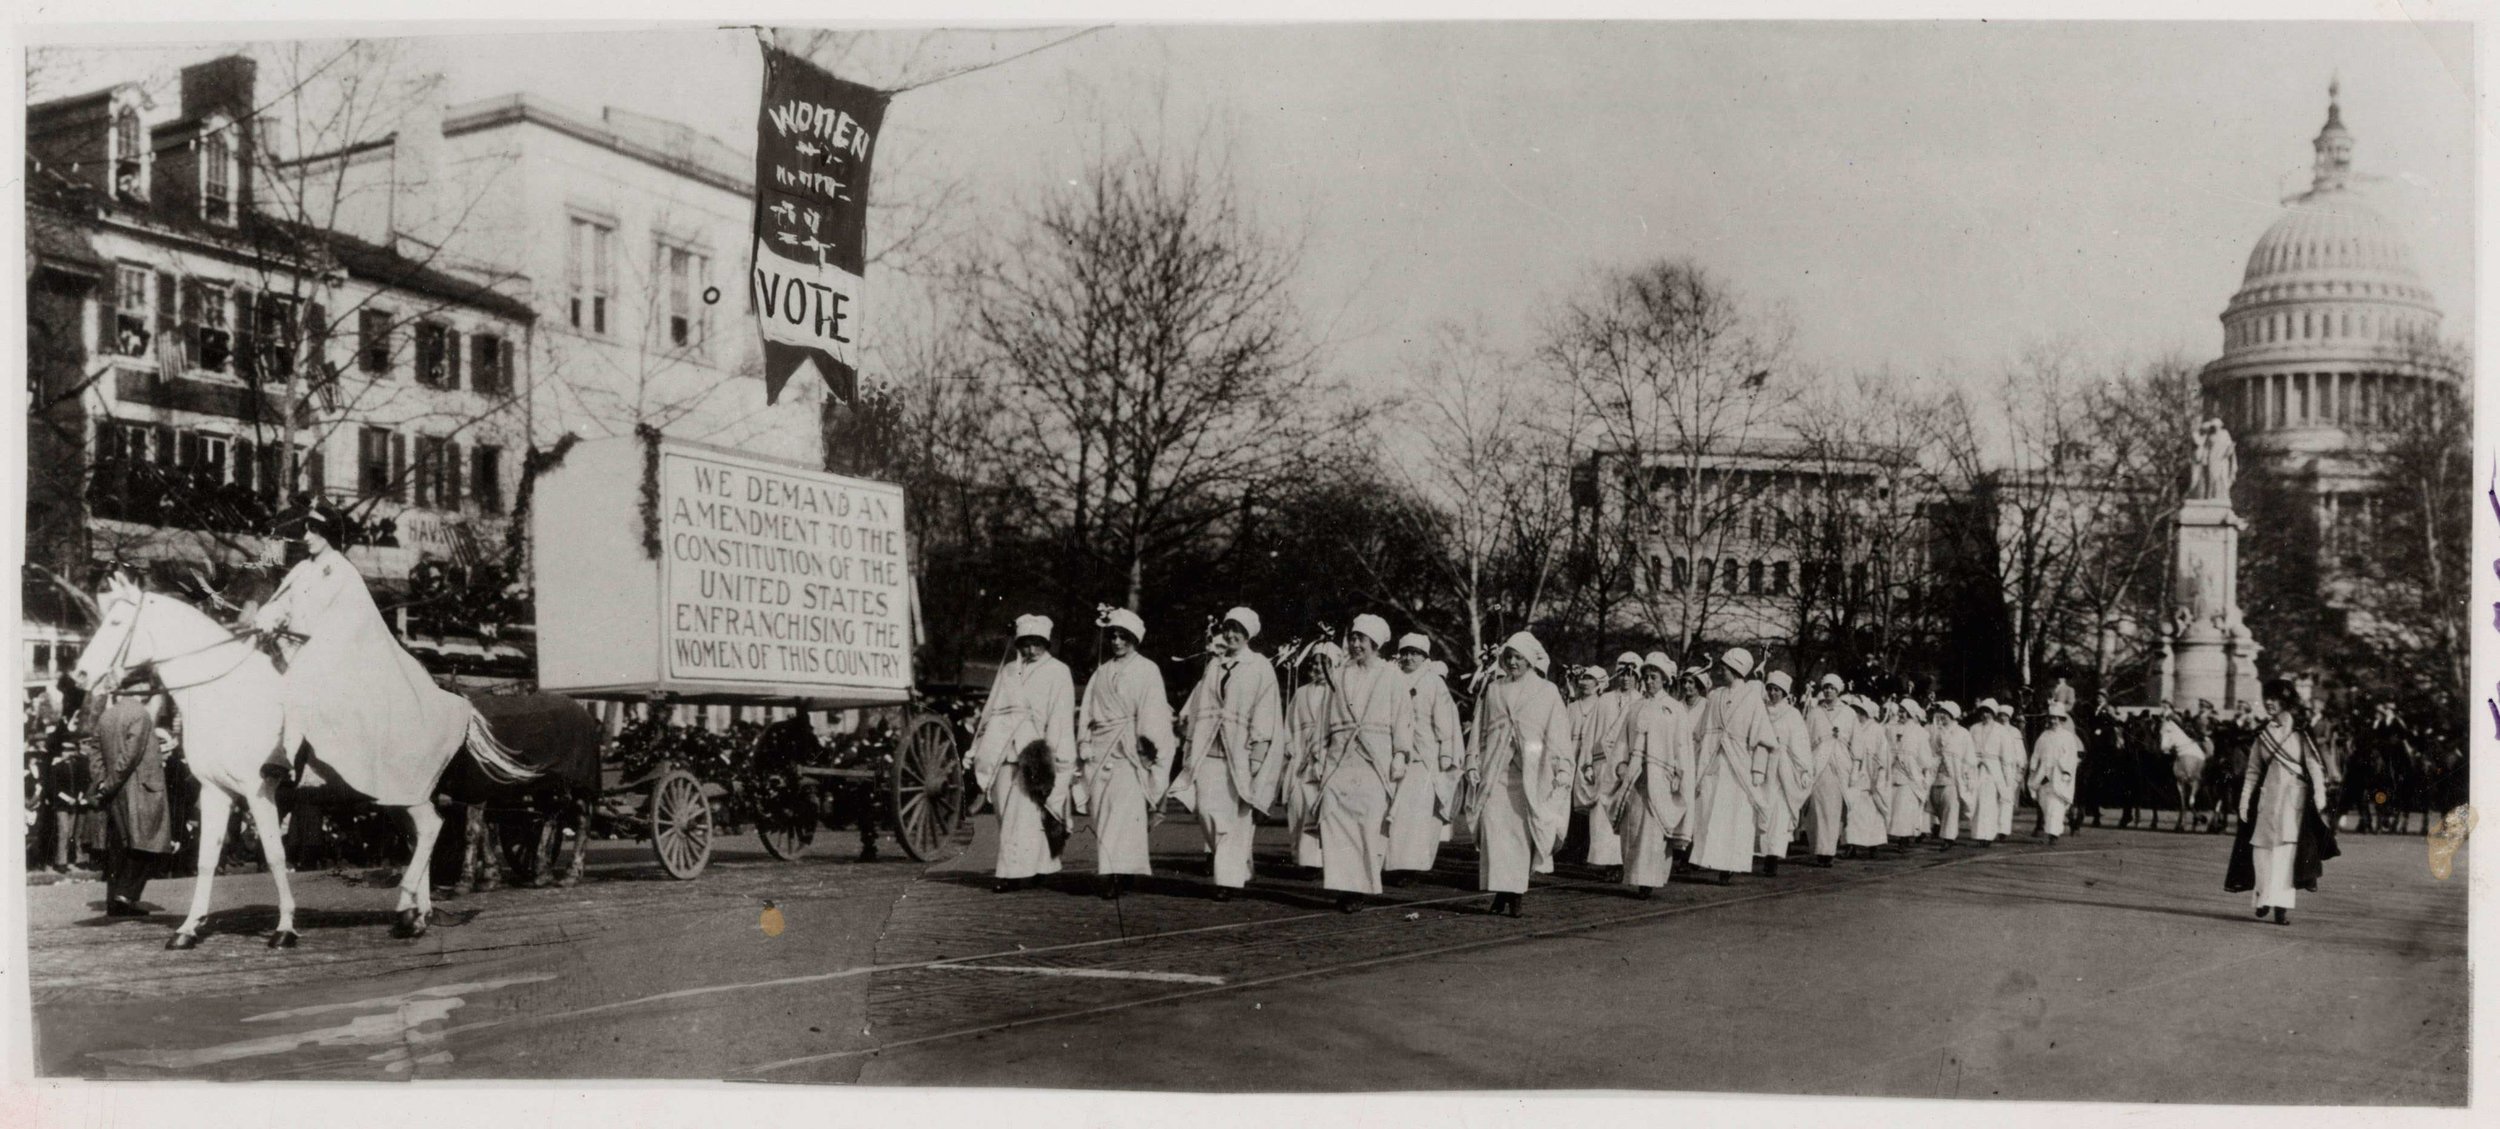   Women Marching in Suffrage Parade in Washington, DC  